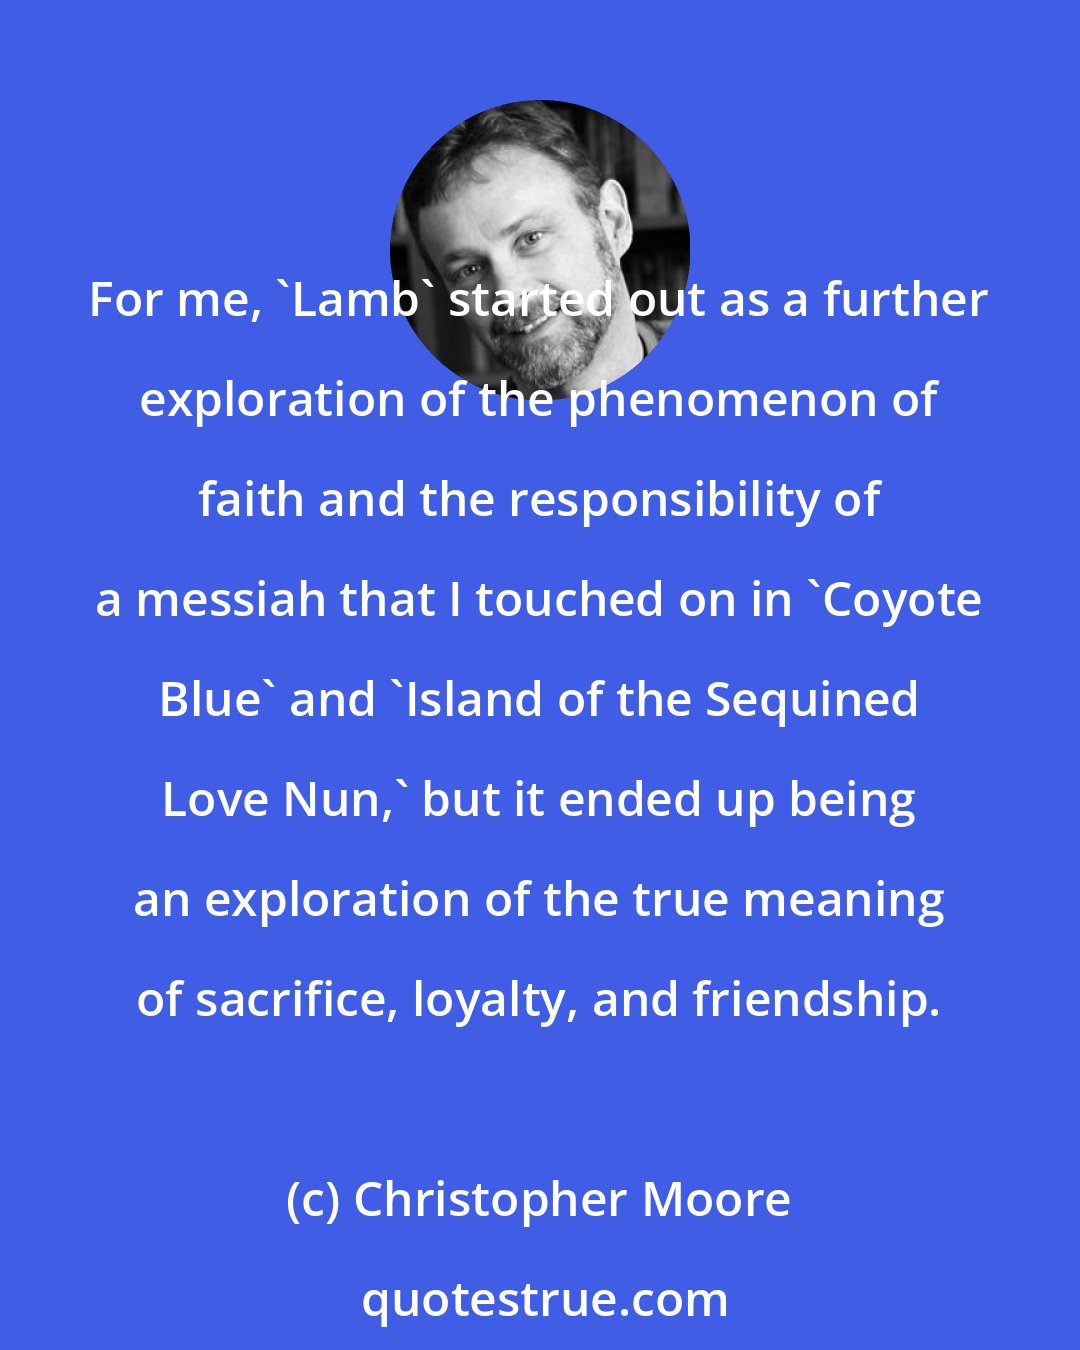 Christopher Moore: For me, 'Lamb' started out as a further exploration of the phenomenon of faith and the responsibility of a messiah that I touched on in 'Coyote Blue' and 'Island of the Sequined Love Nun,' but it ended up being an exploration of the true meaning of sacrifice, loyalty, and friendship.